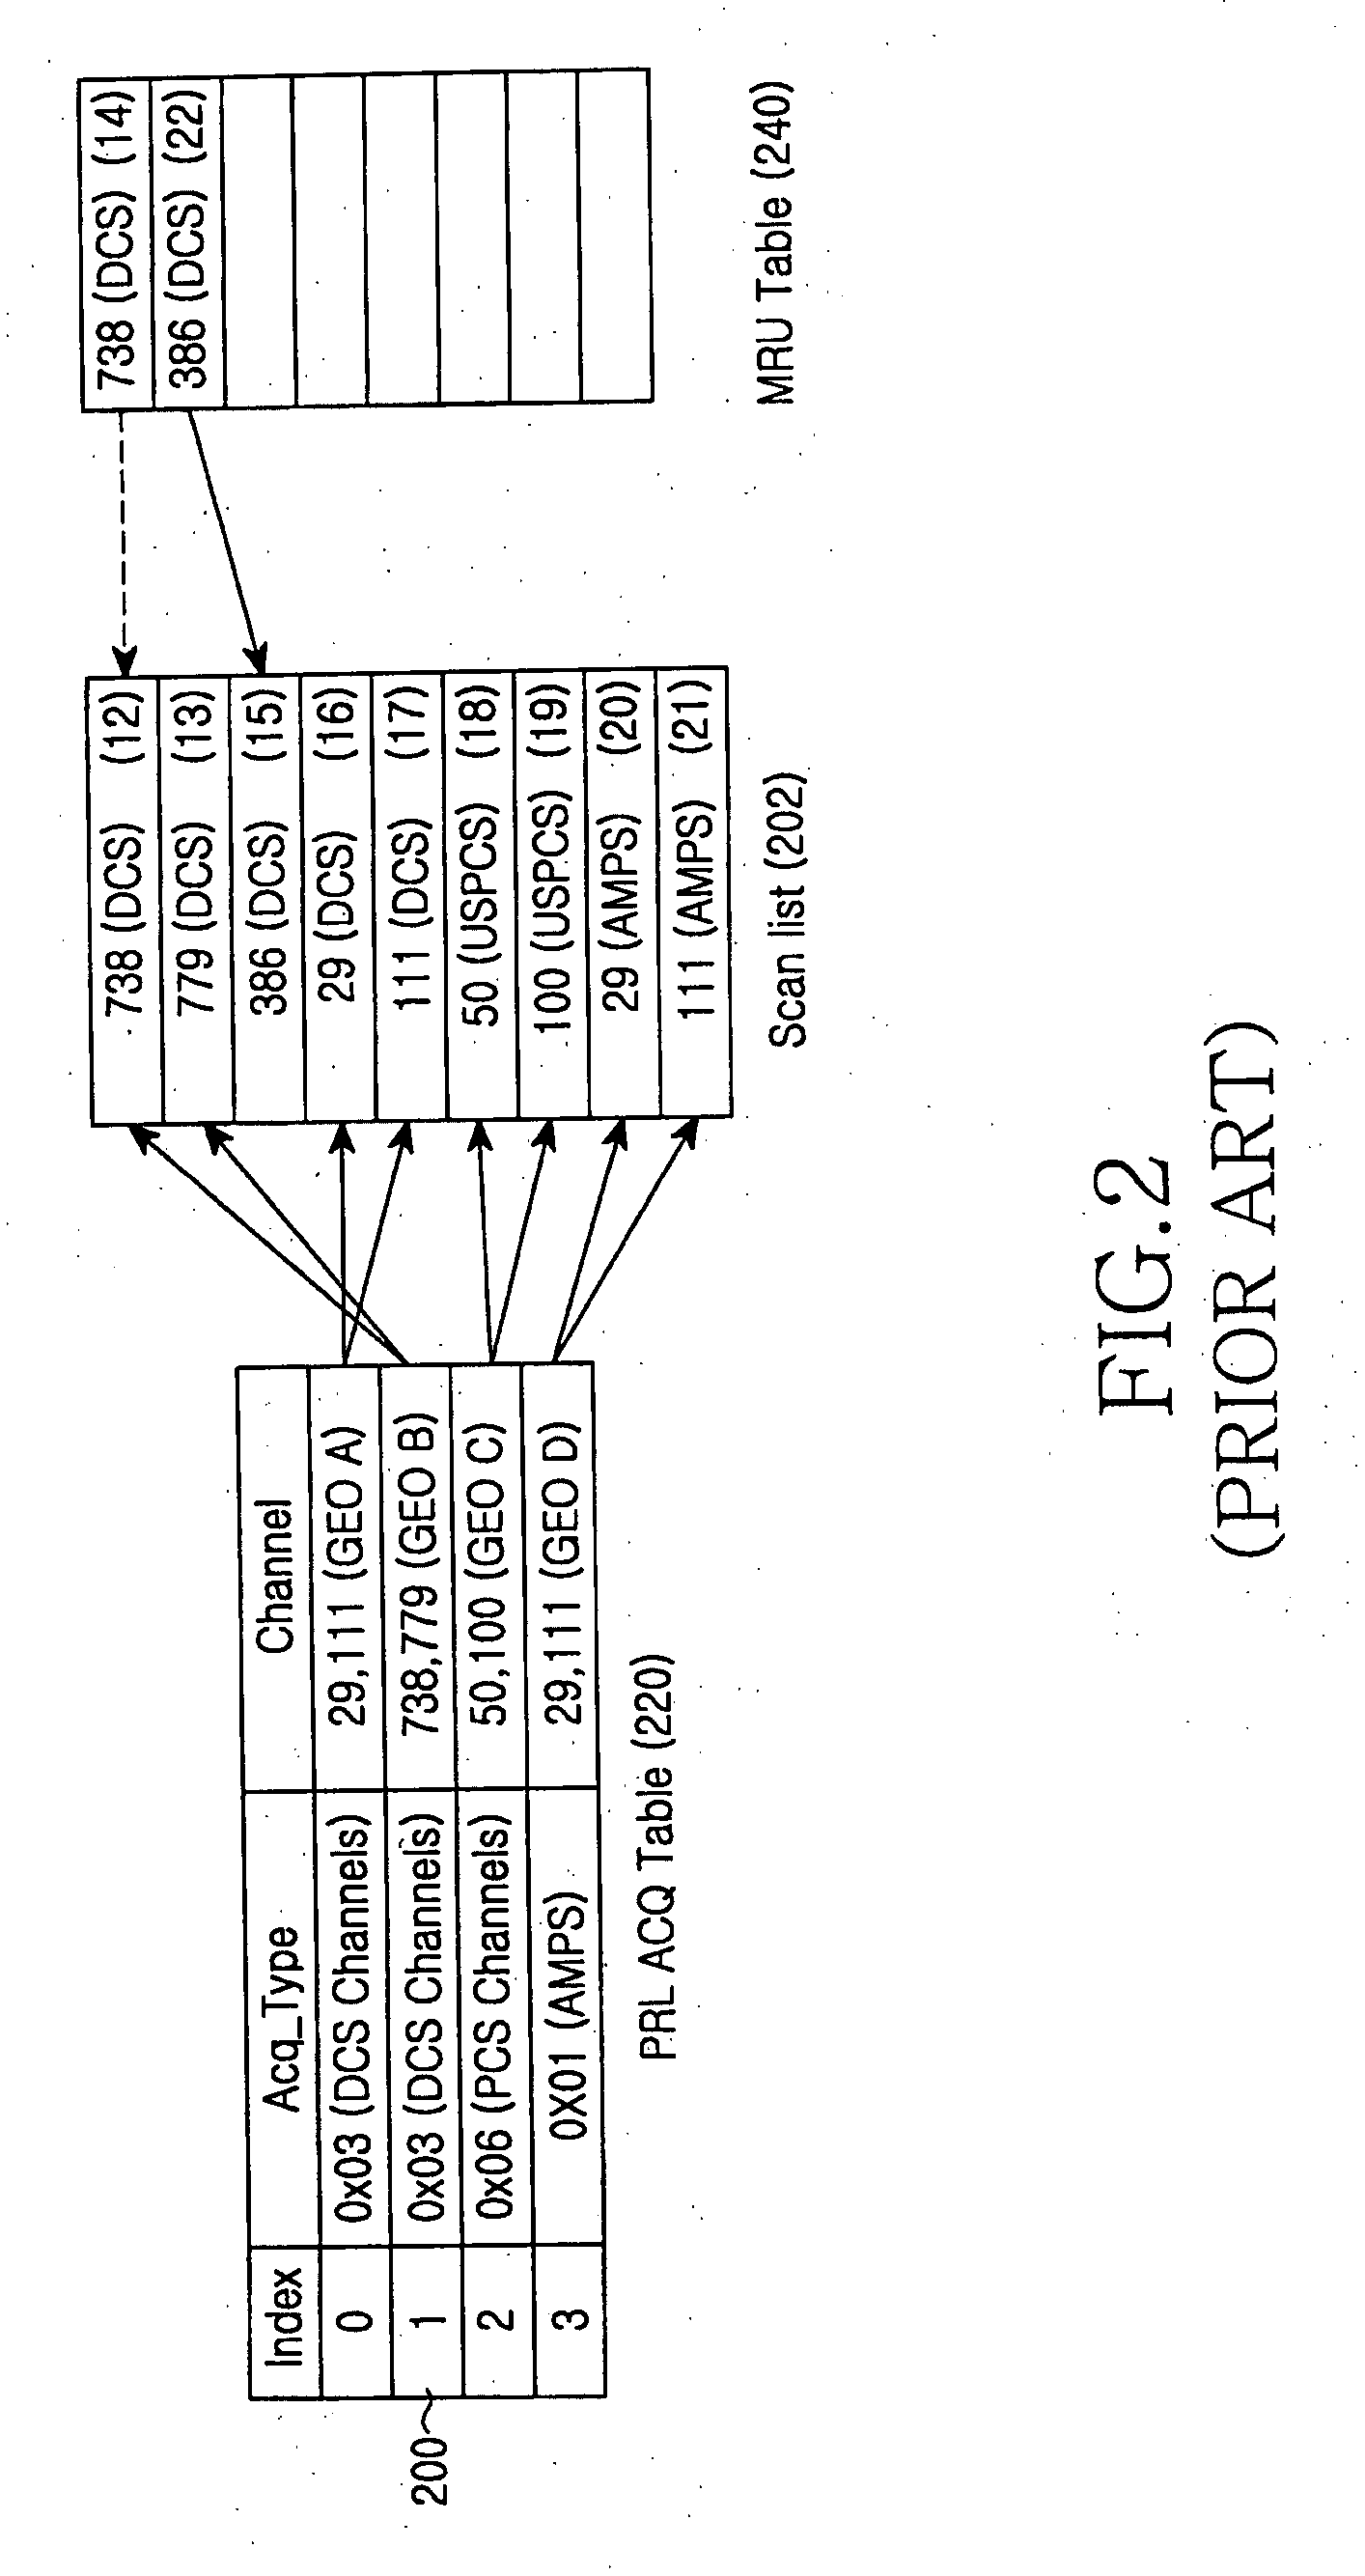 Method for selecting system in a mobile terminal